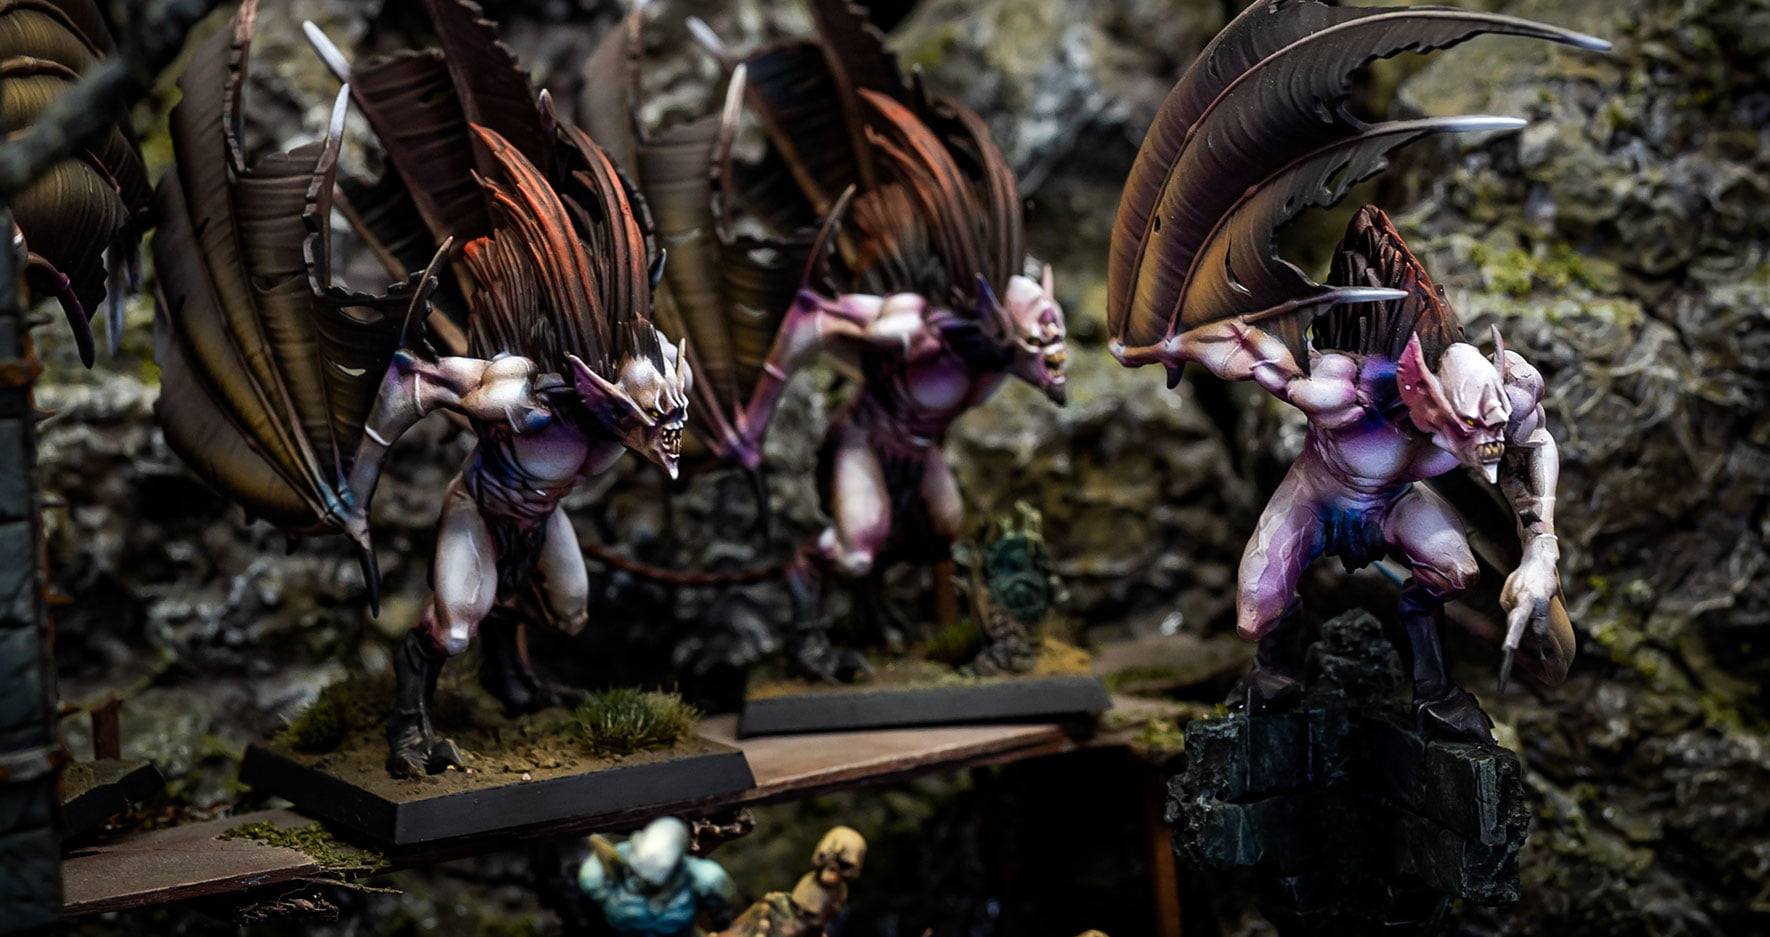 Flesh eater courts painted miniatures